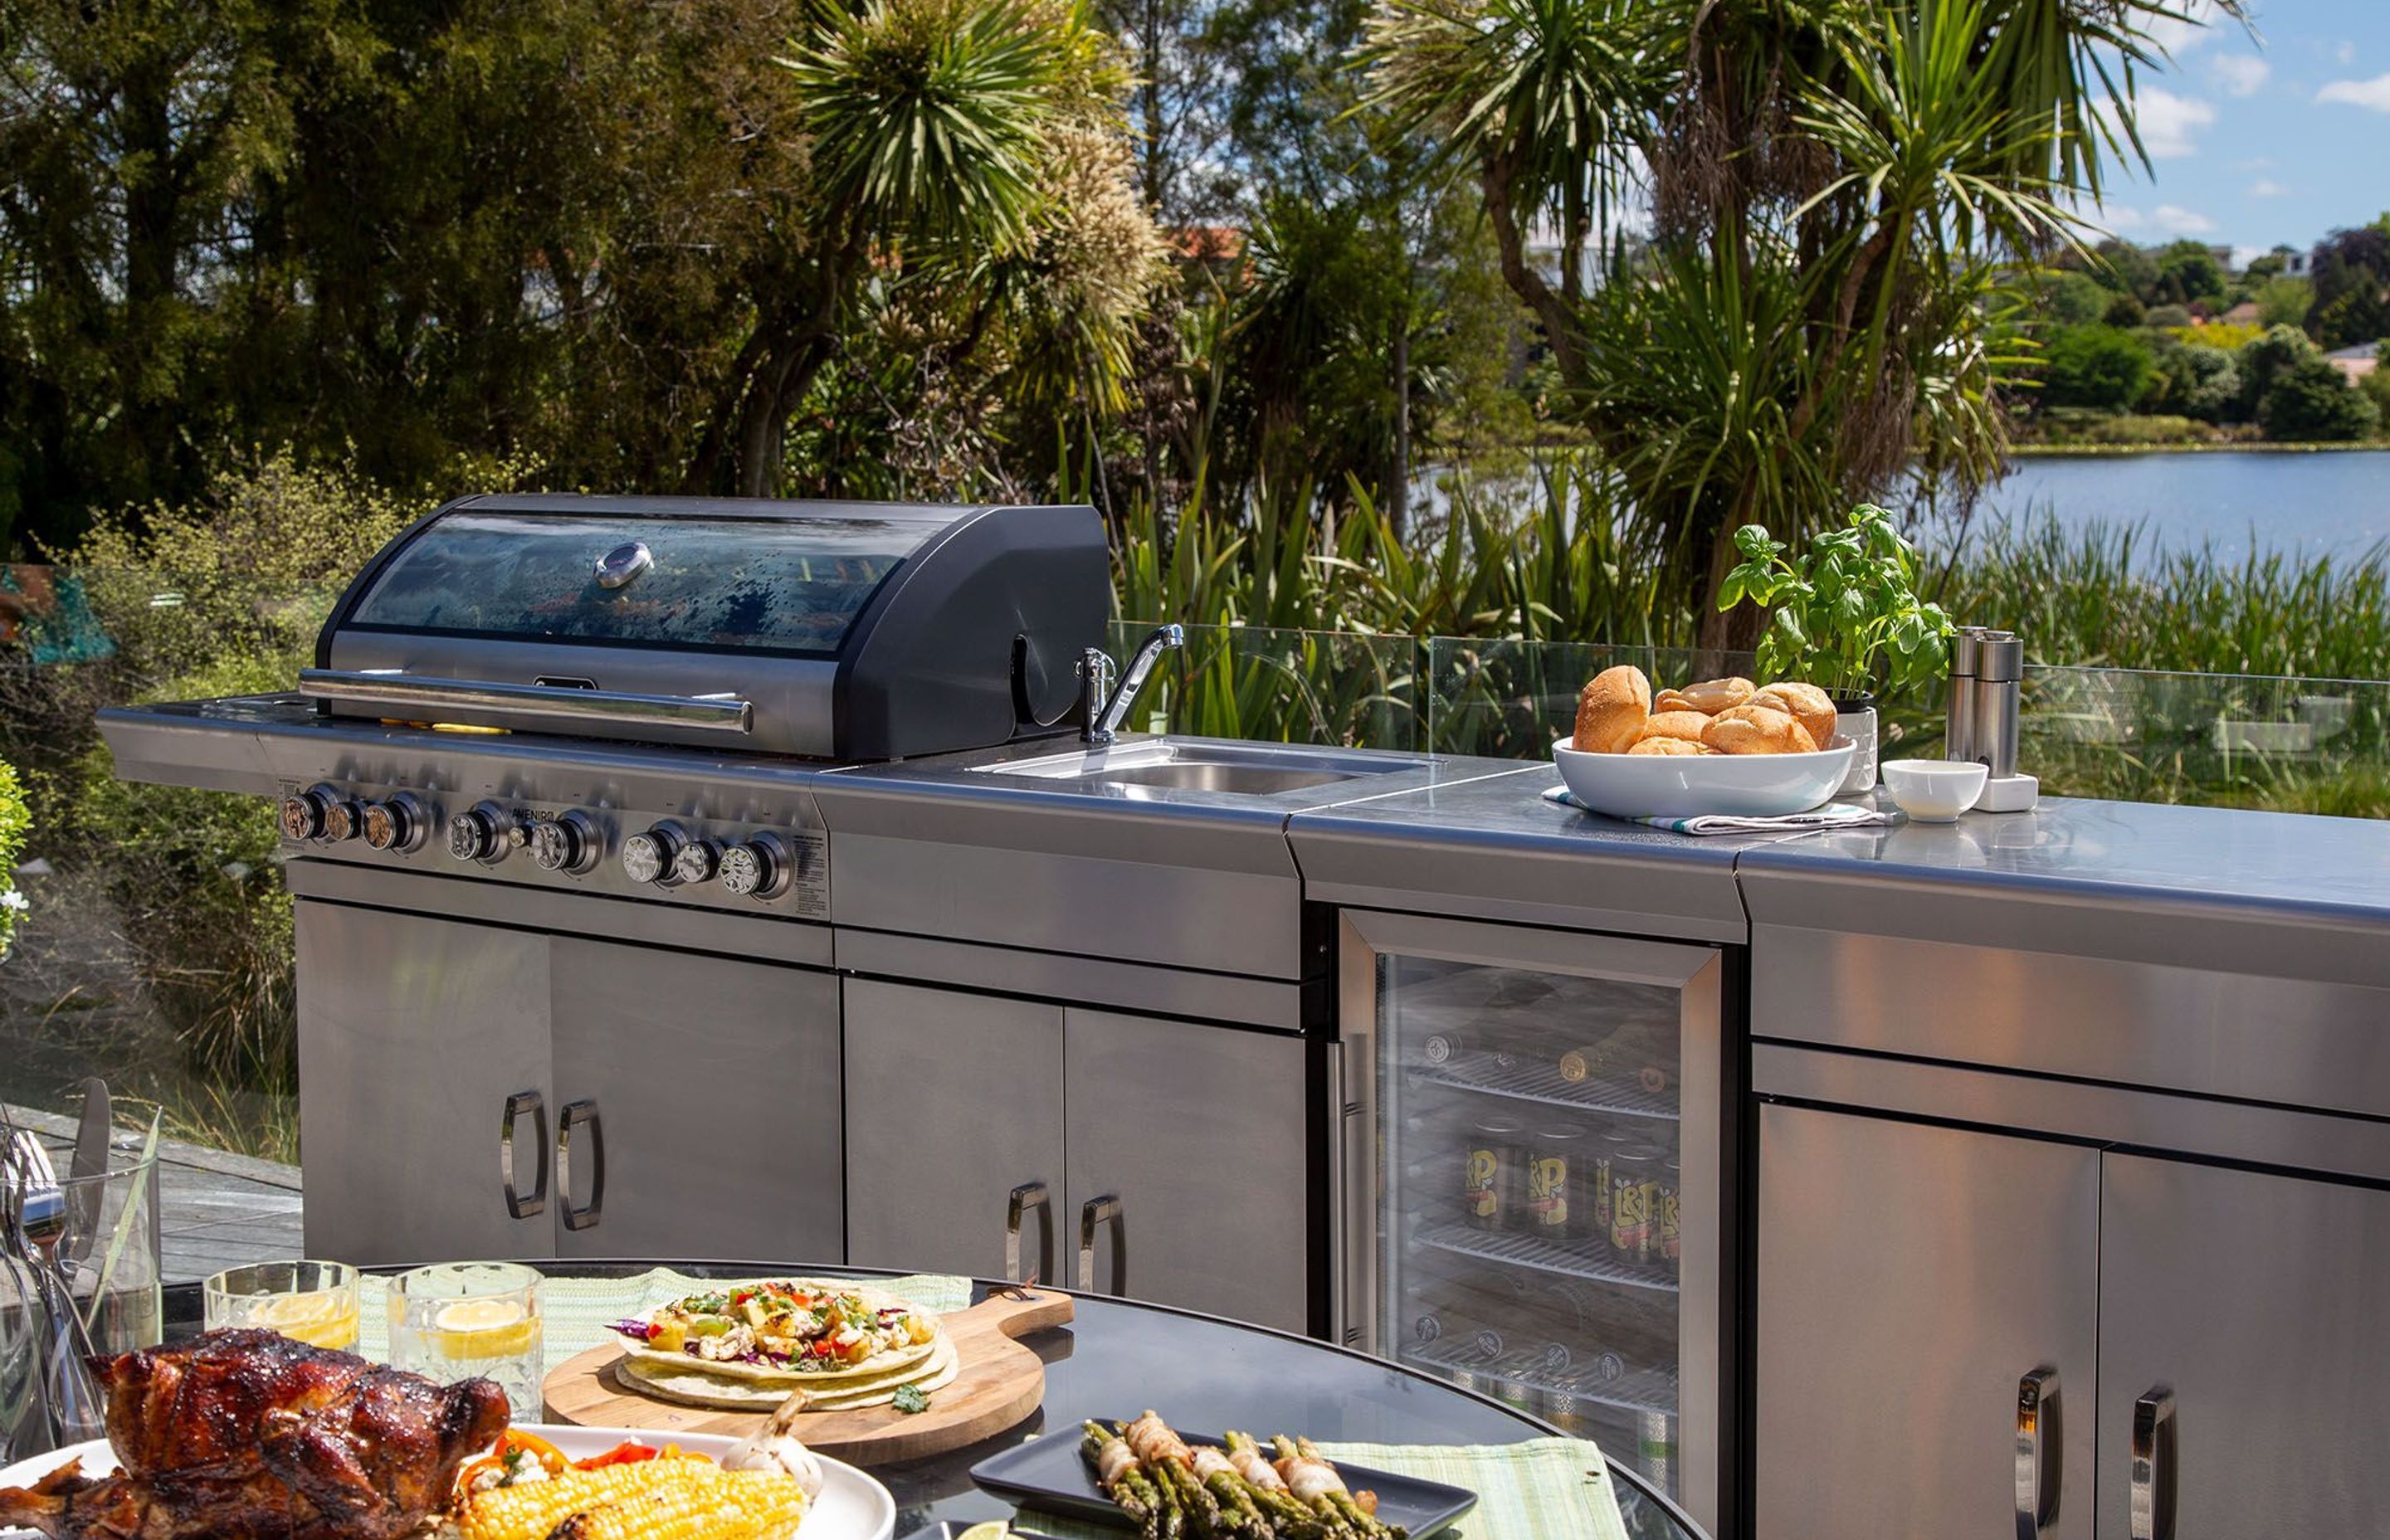 Innovative outdoor bbq kitchens bring tradition, style, and functionality side by side